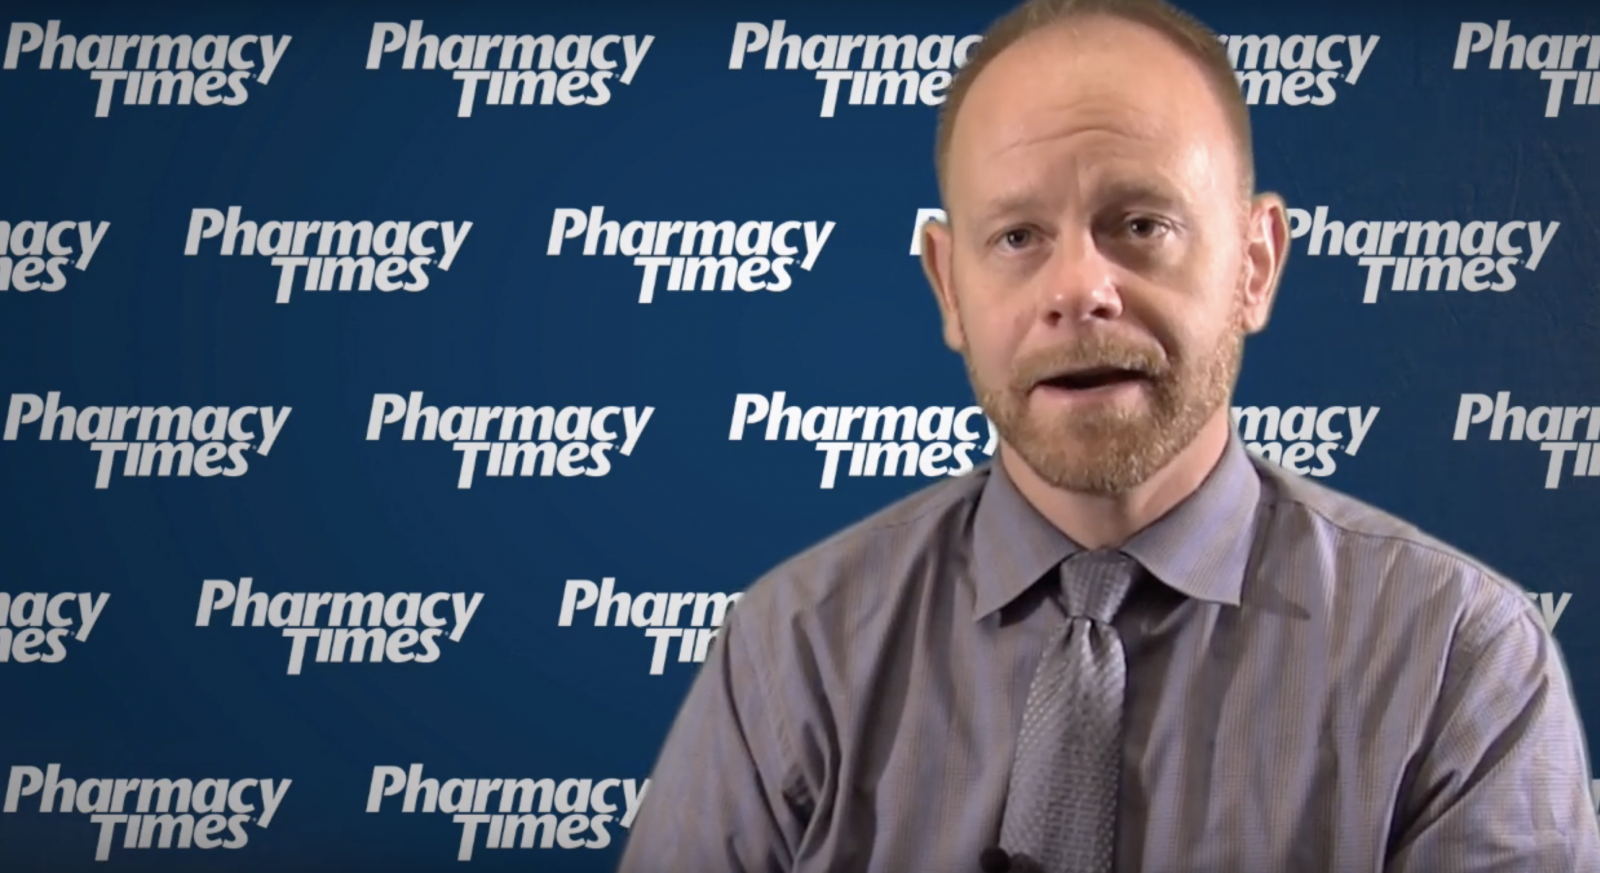 Opportunities for Chain Pharmacies in Preventive Care Services